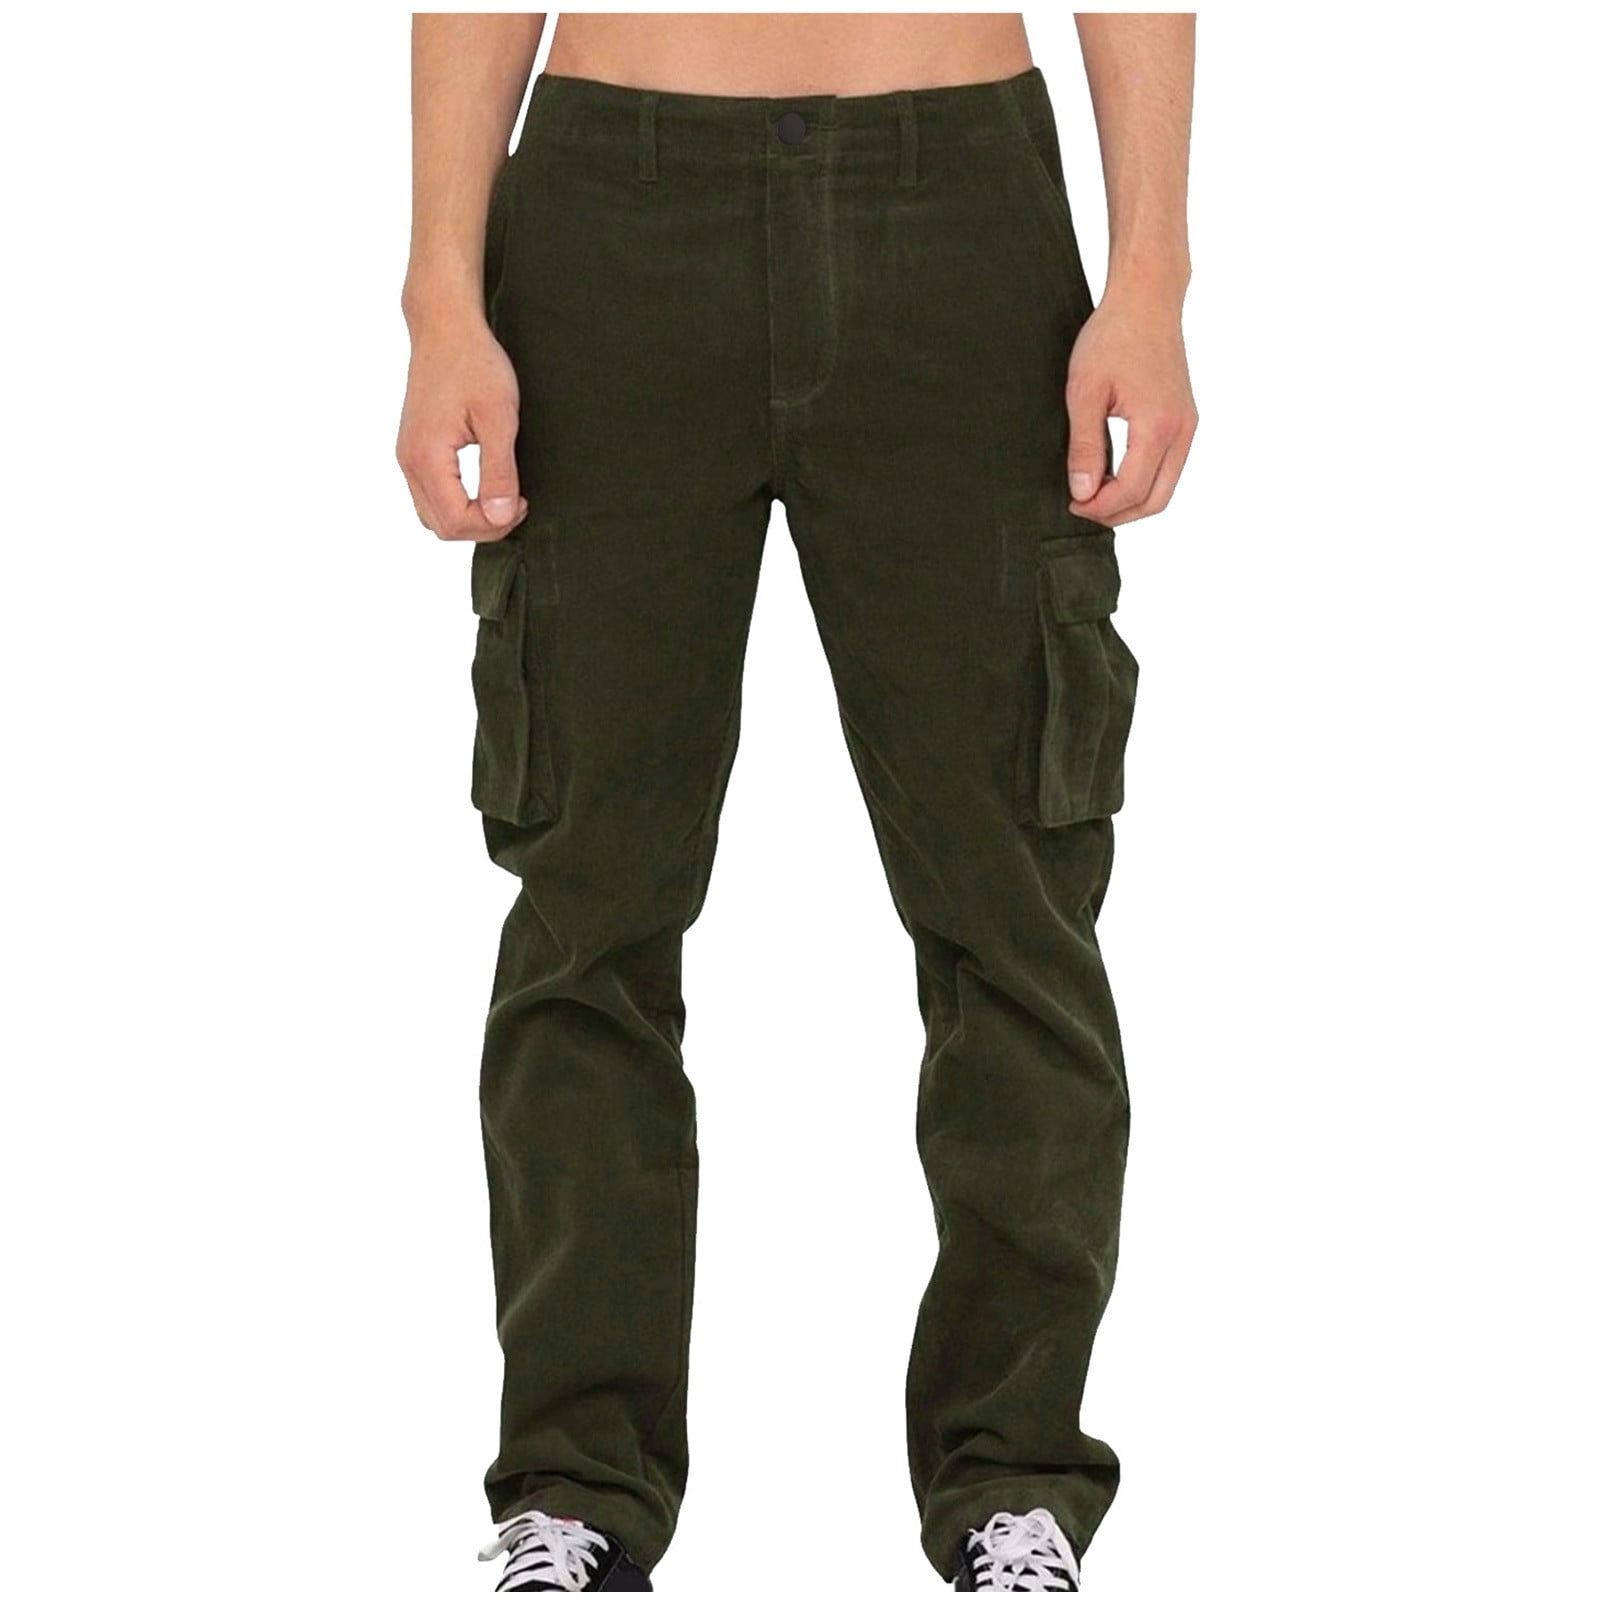 Men's Corduroy Cargo Pants Casual Straight Leg Multi Pockets Trousers  Trendy Solid Color Outdoor Athletic Workout Pants